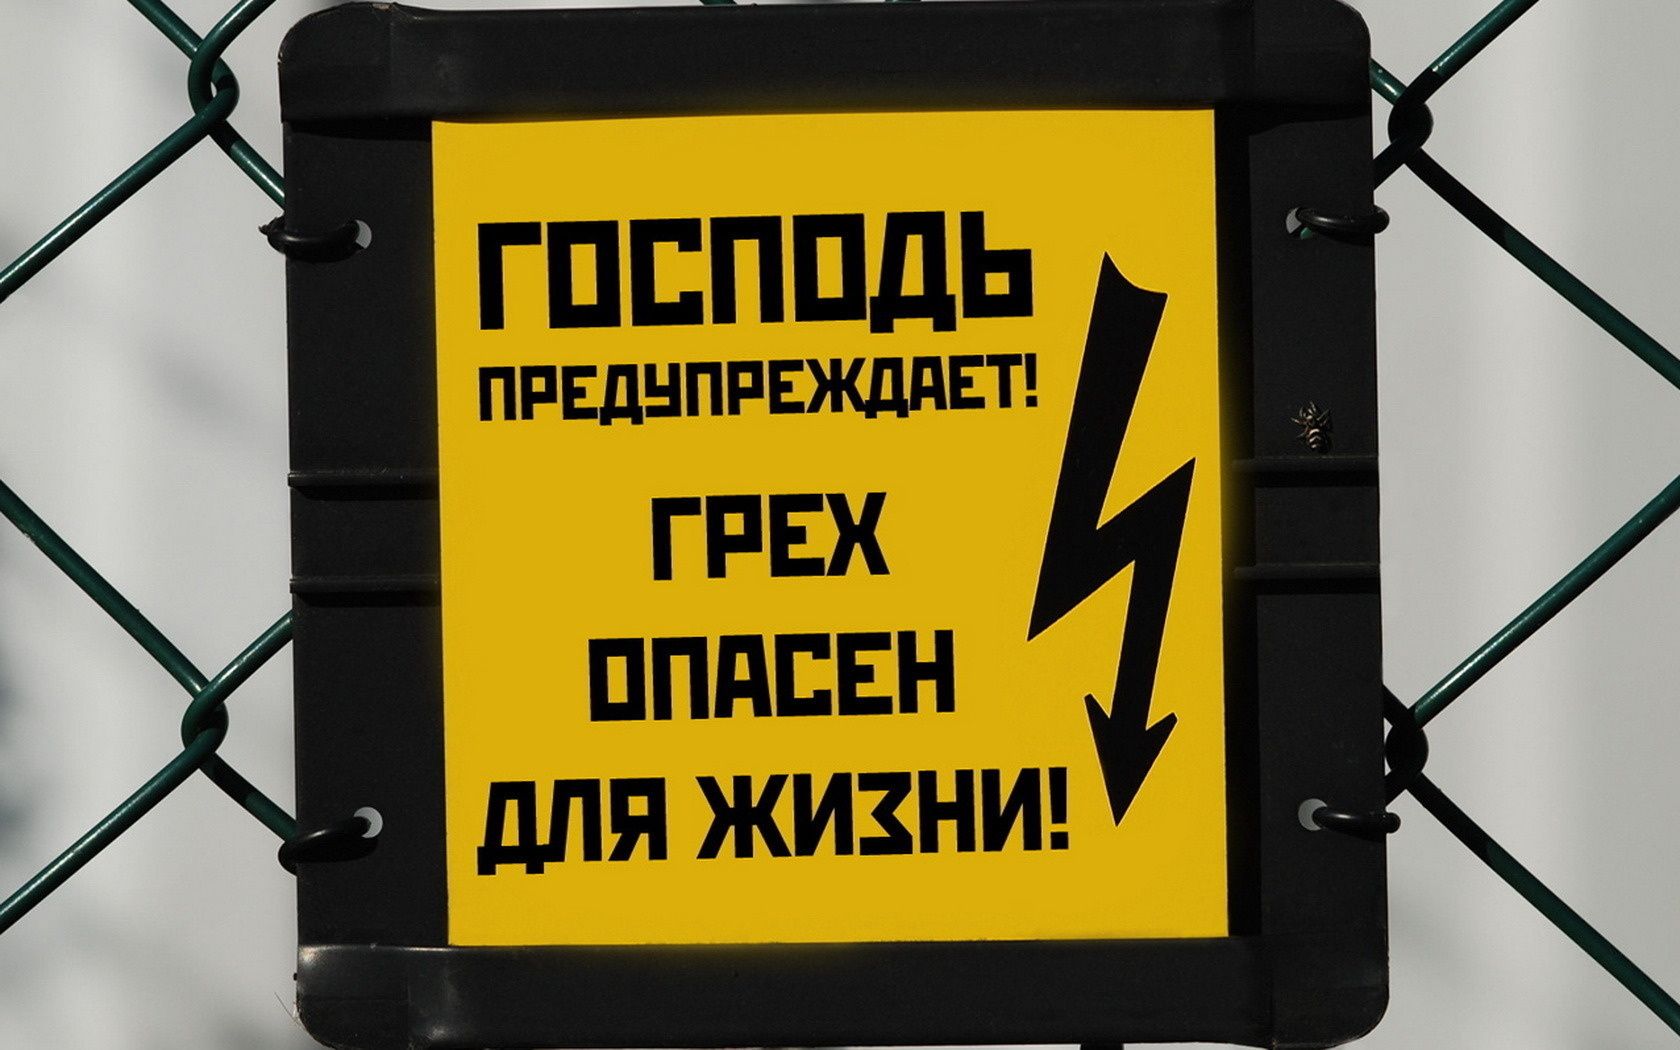 signs danger safety warning caution security emergency sign forbidden endanger protection fossil fuel service alert industry gasoline business aid